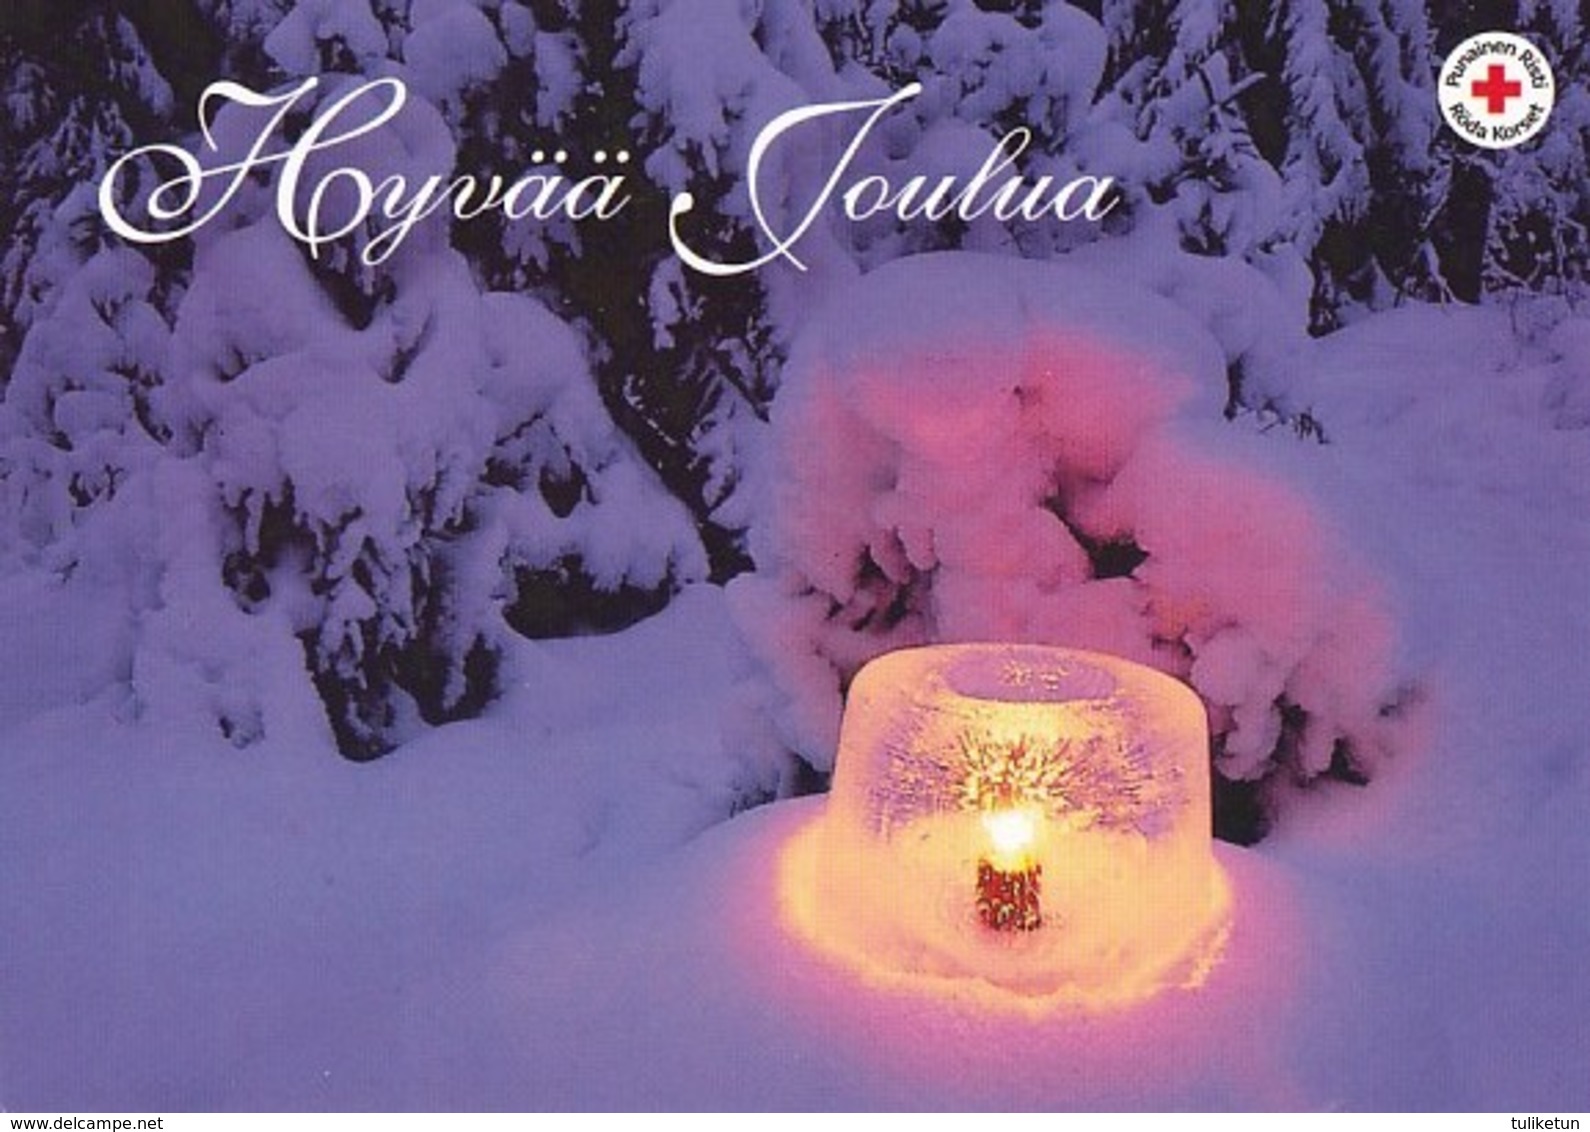 Winter Scene - Landscape - Candle Ice Lantern - Red Cross - Suomi Finland - Itella Post Oy - Postage Payed - Postal Stationery